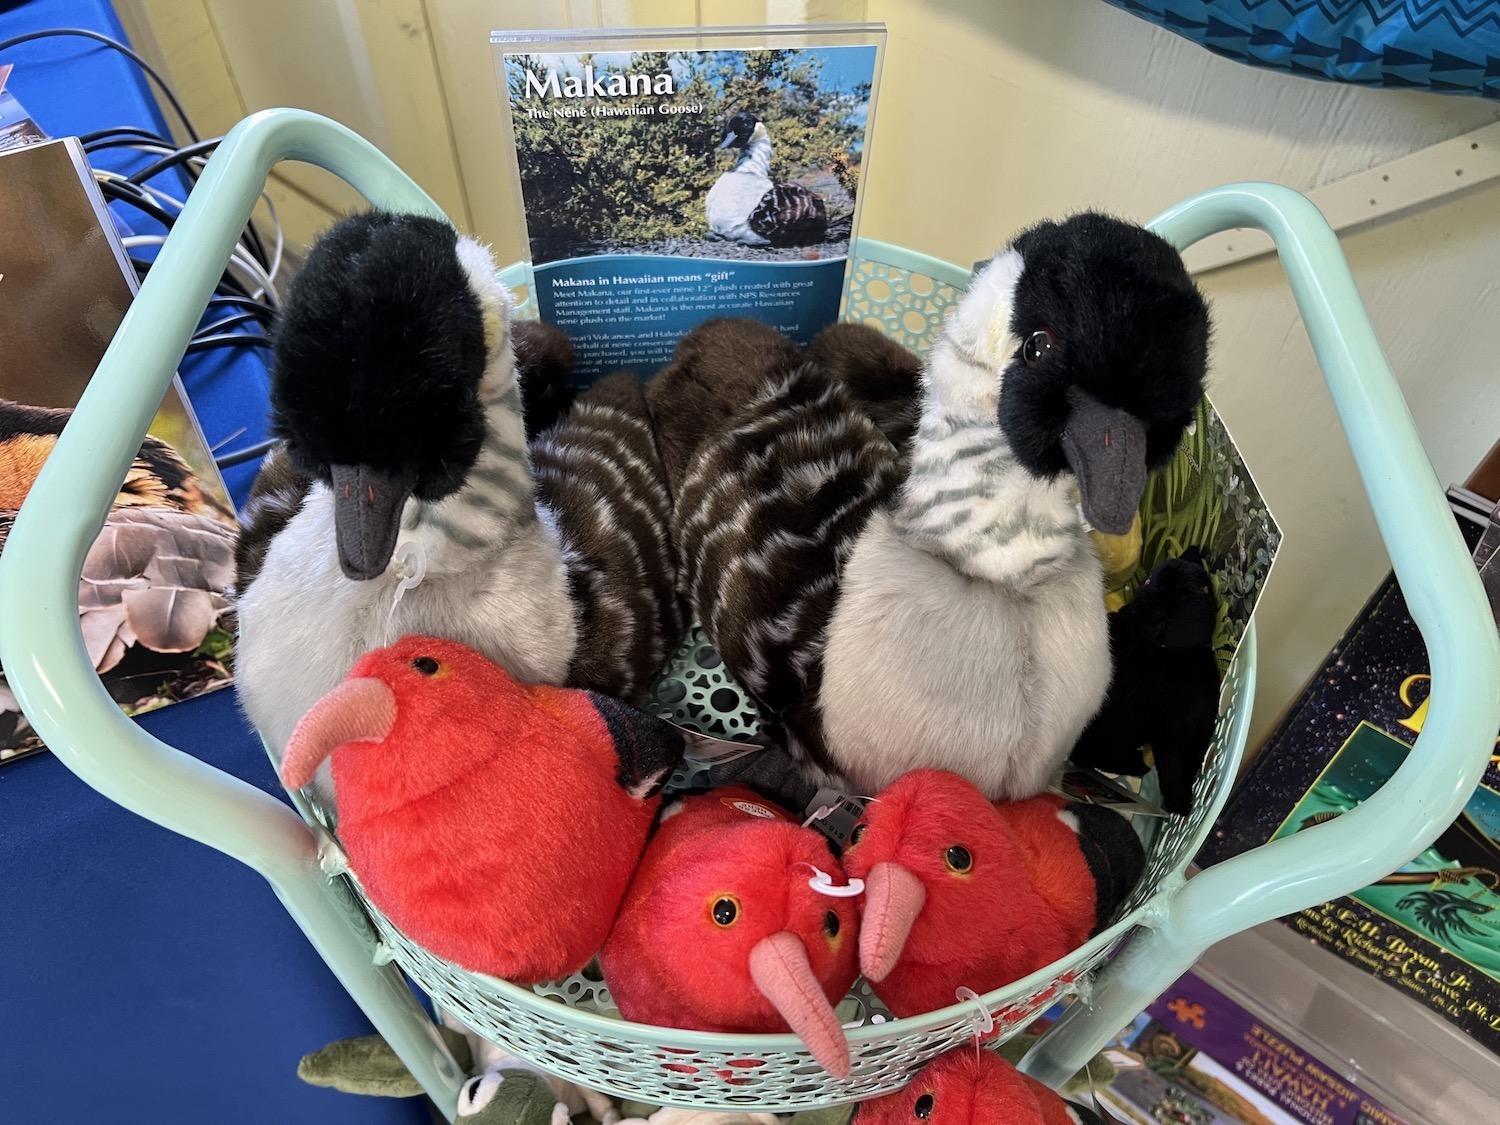 A $1 from the sale of each plush nēnē — spotted here in the Kahuku Unit's gift shop — goes to conservation projects.